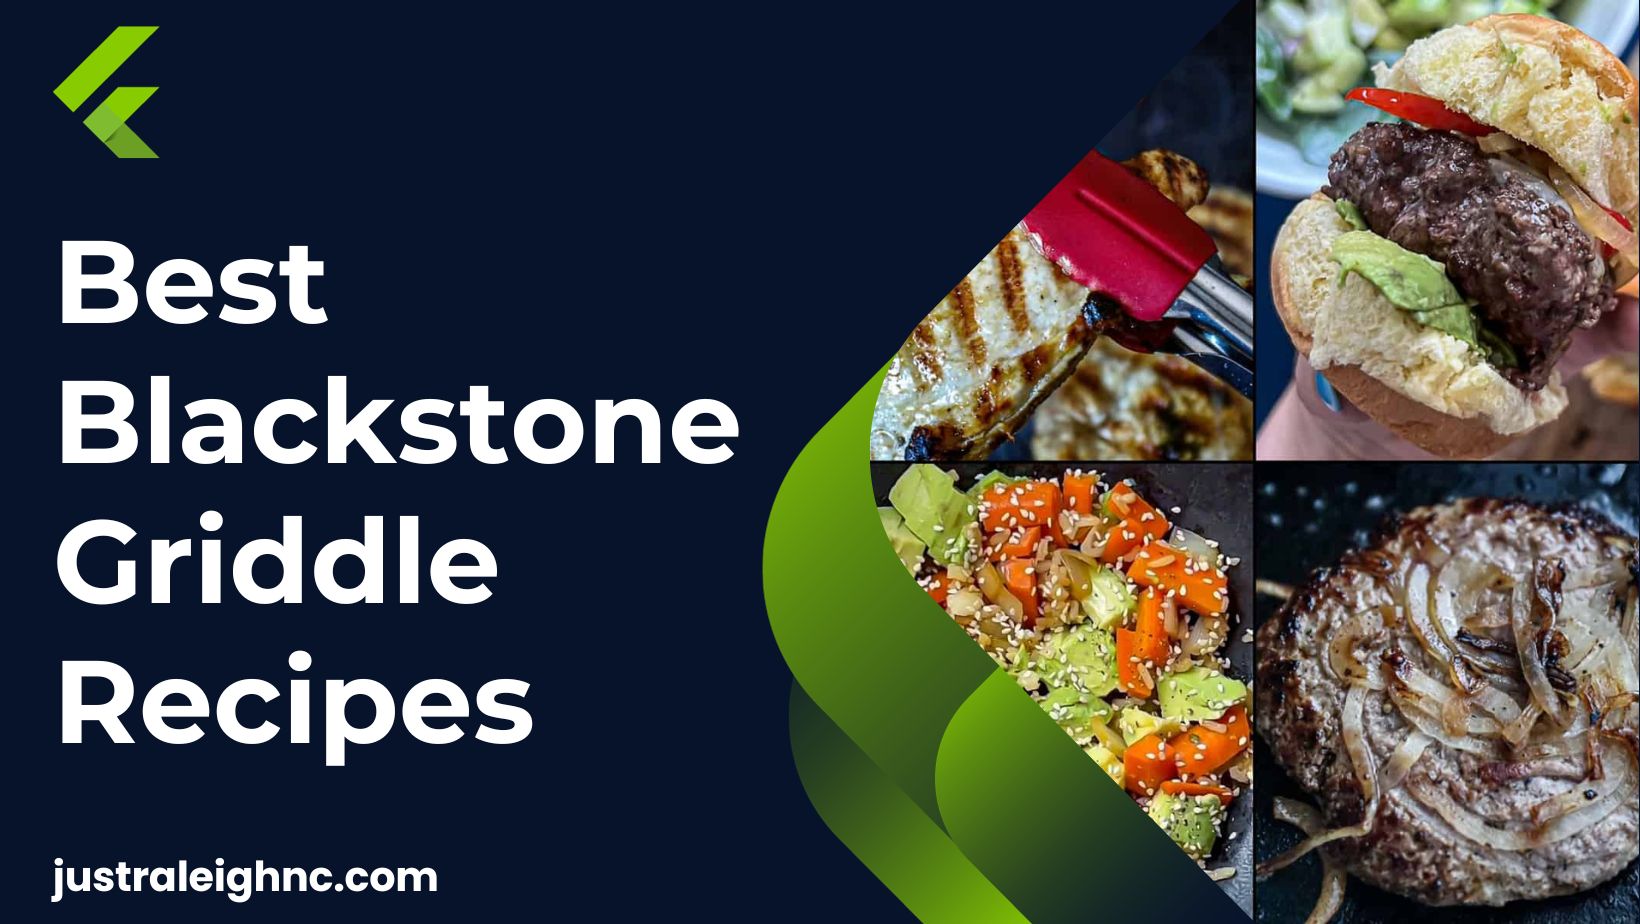 How to Clean a Blackstone Griddle - Ultimate Guide